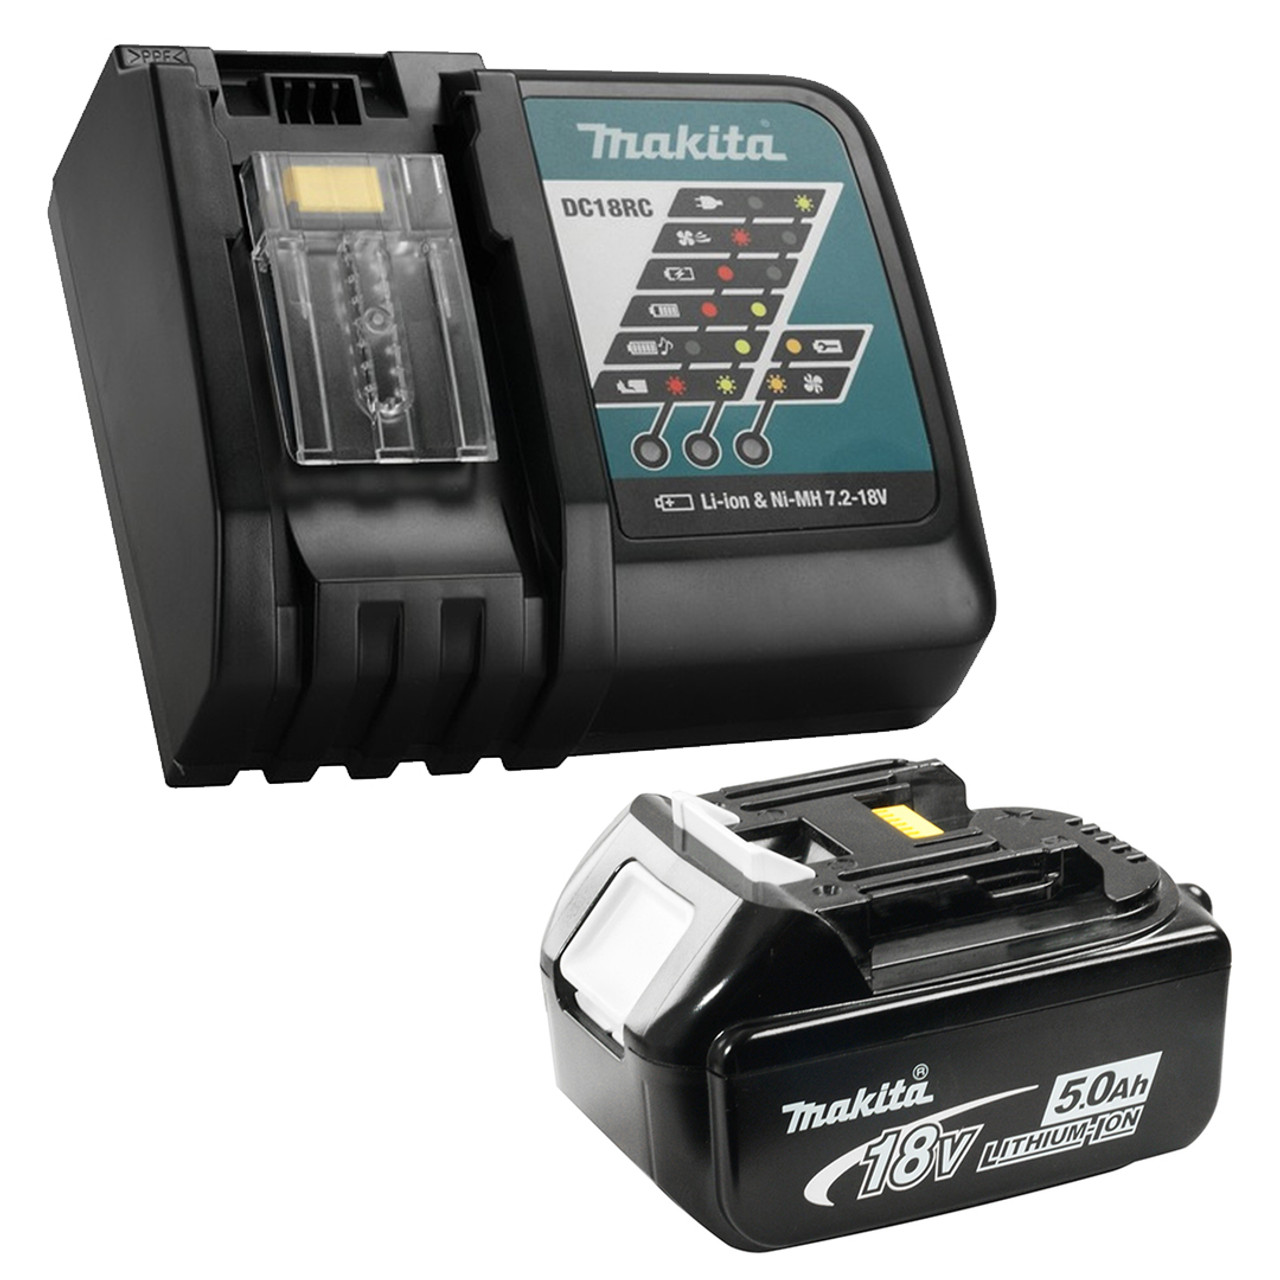 Makita 196406-9 Batterie 18V 4.0a/h lithium-ion